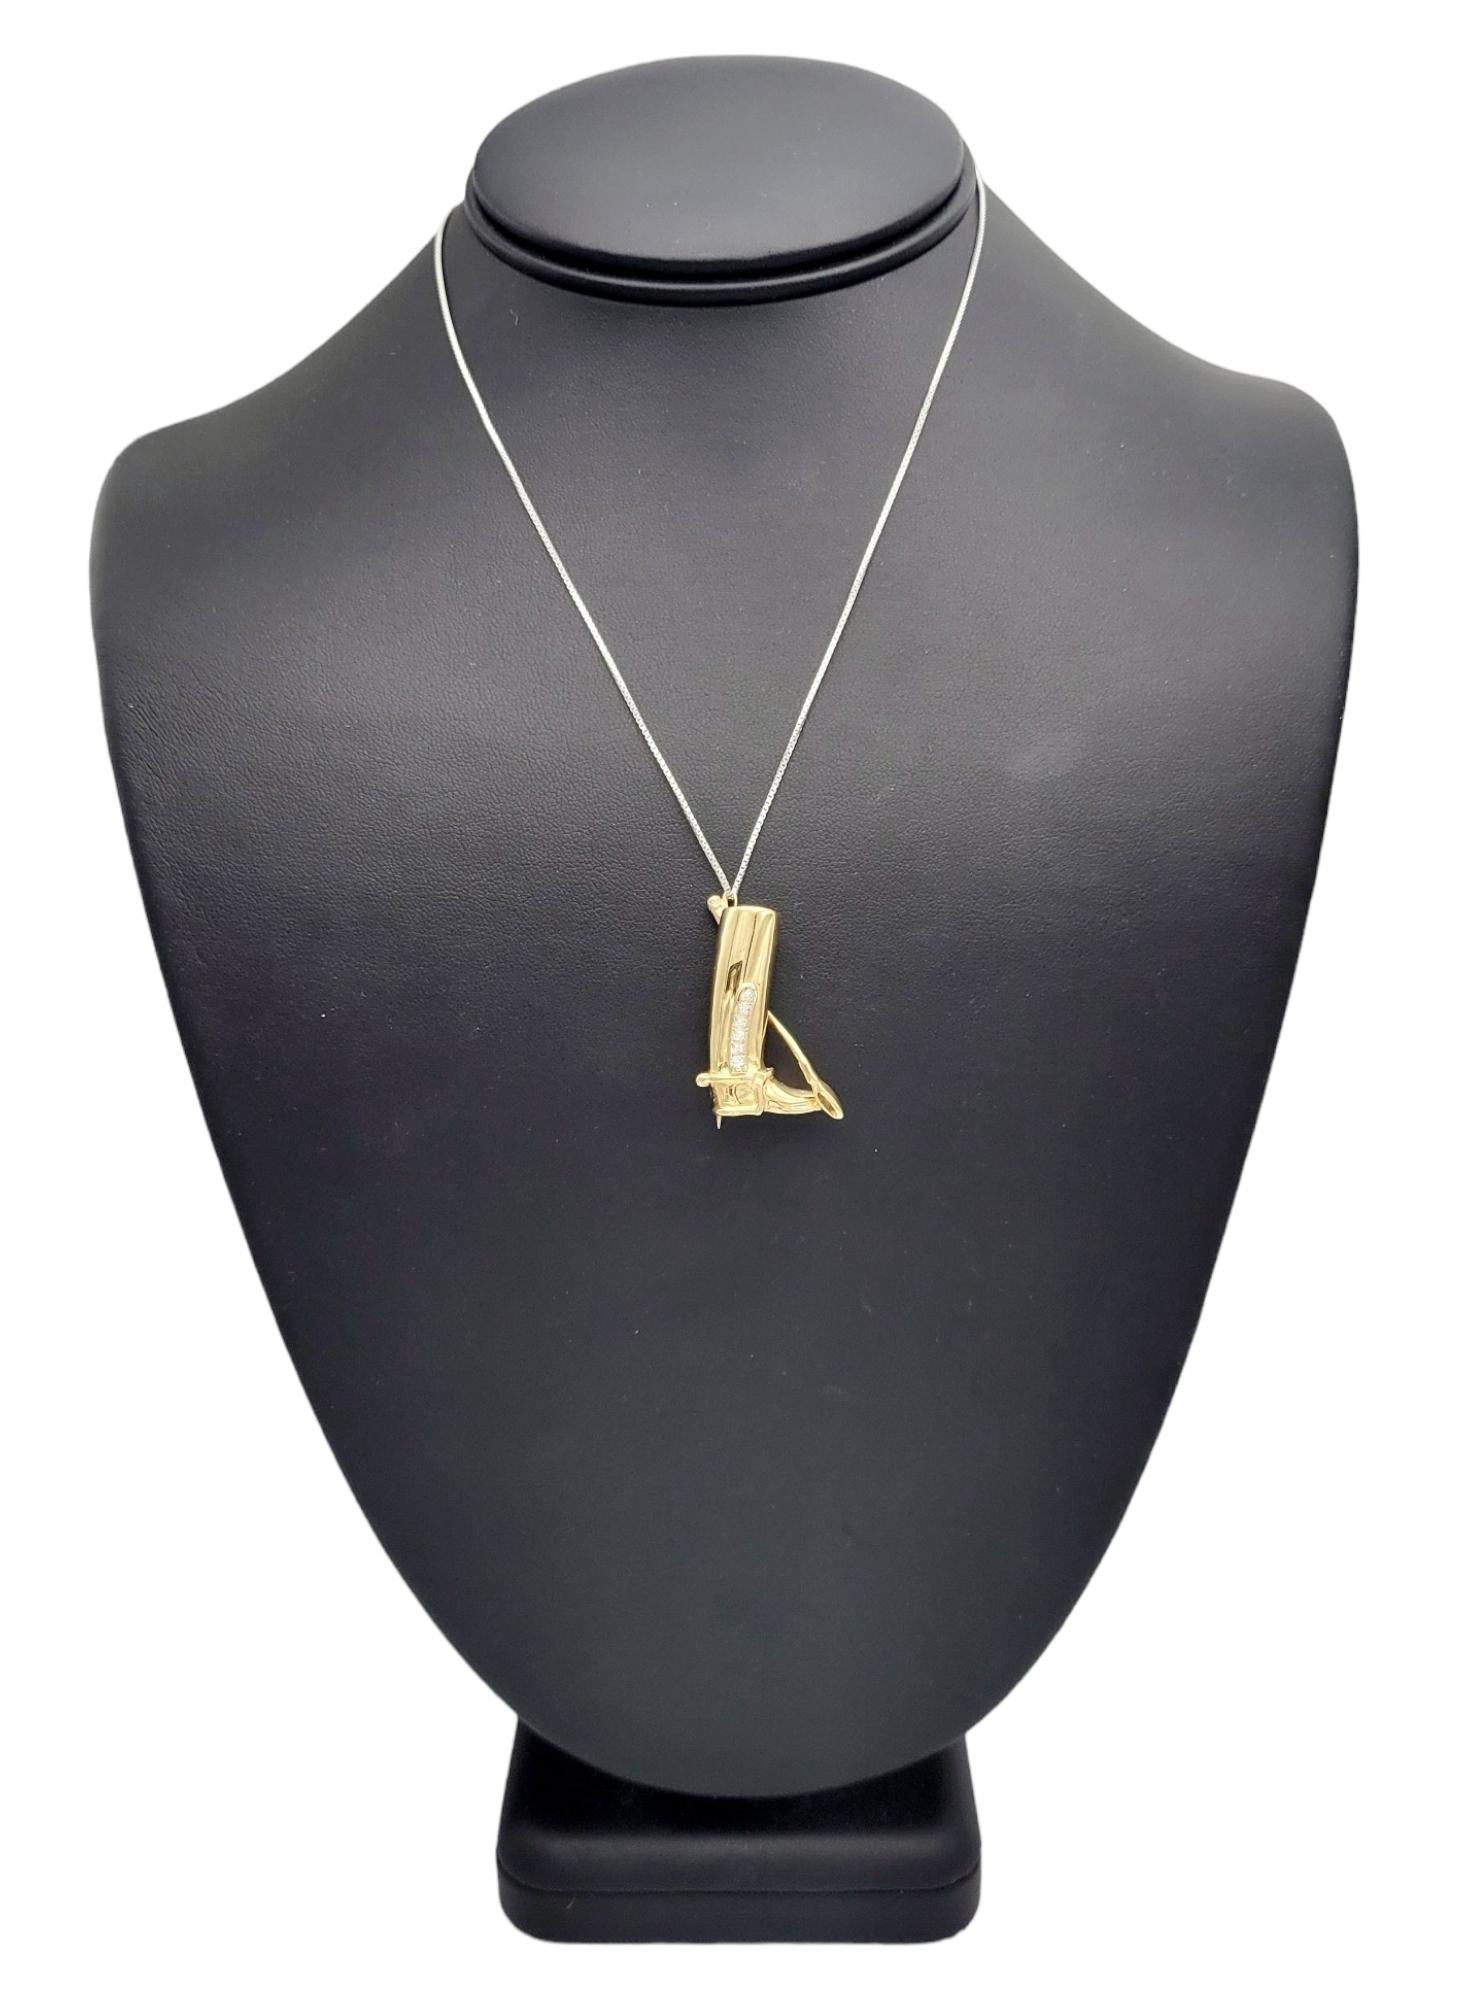 Diamond Equestrian Boot & Riding Crop Brooch / Pendant in 14 Karat Yellow Gold For Sale 5